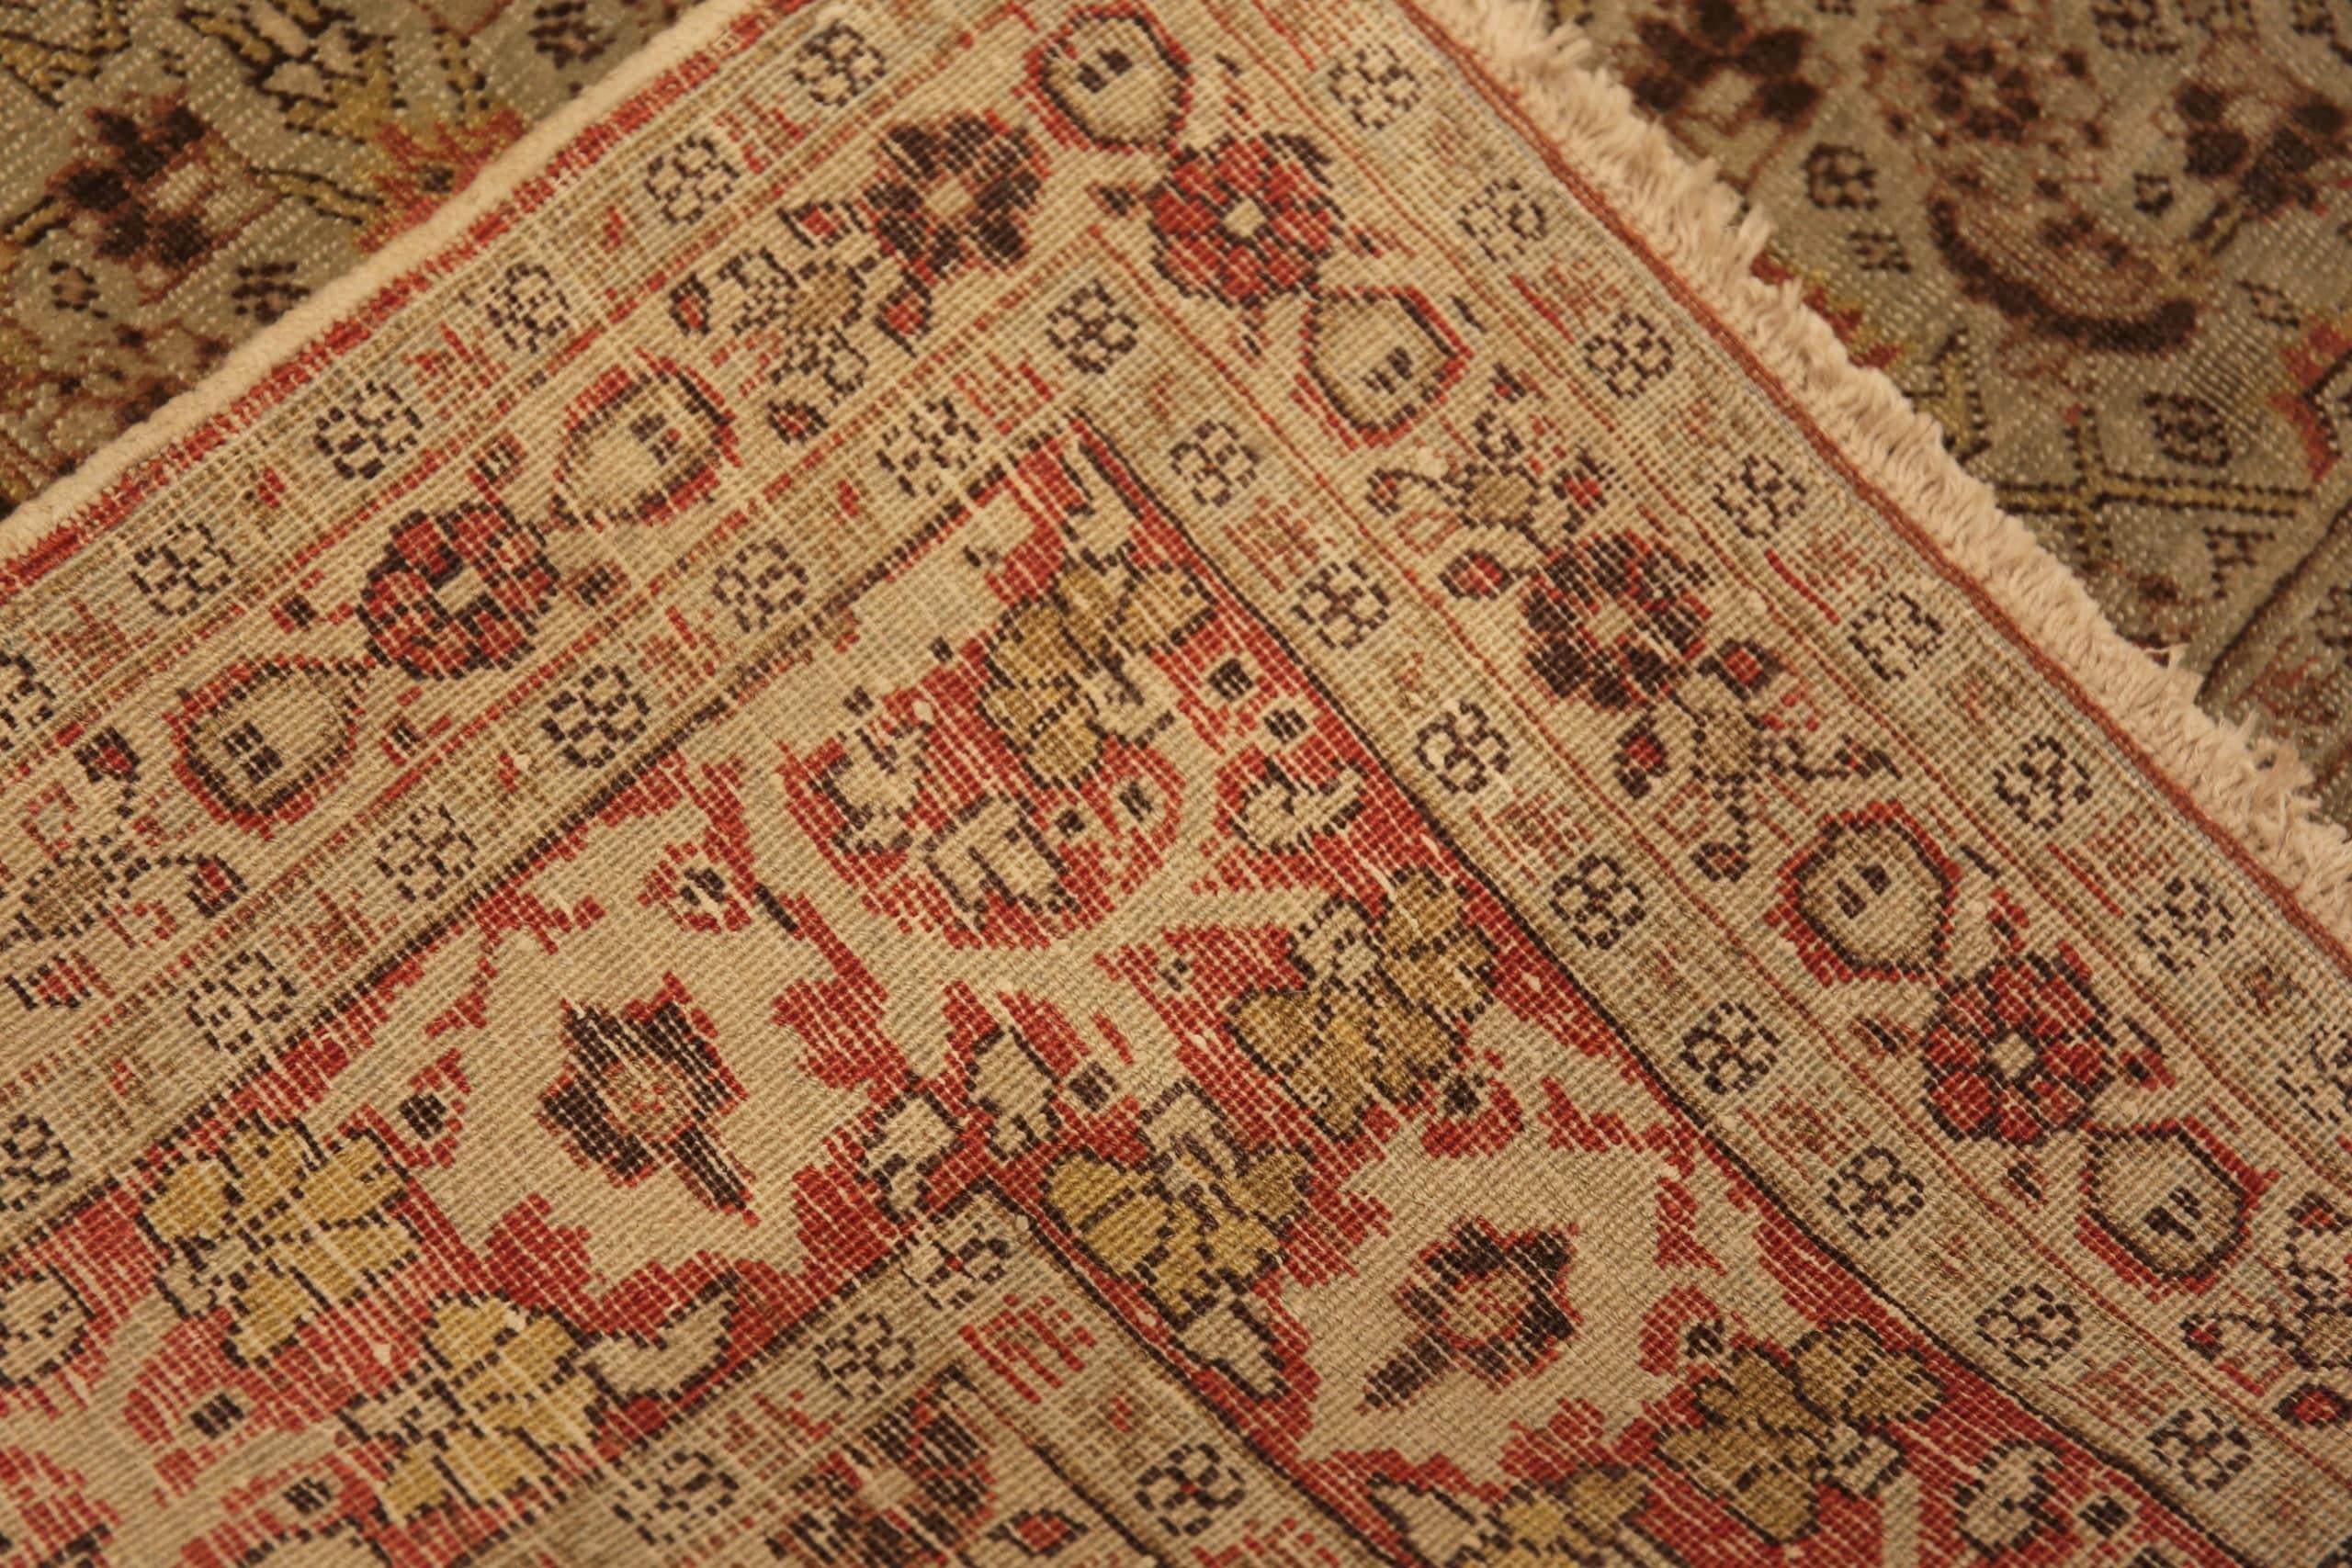 Antique Persian Tabriz Herati Rug. 4 ft 2 in x 5 ft 9 in In Good Condition For Sale In New York, NY